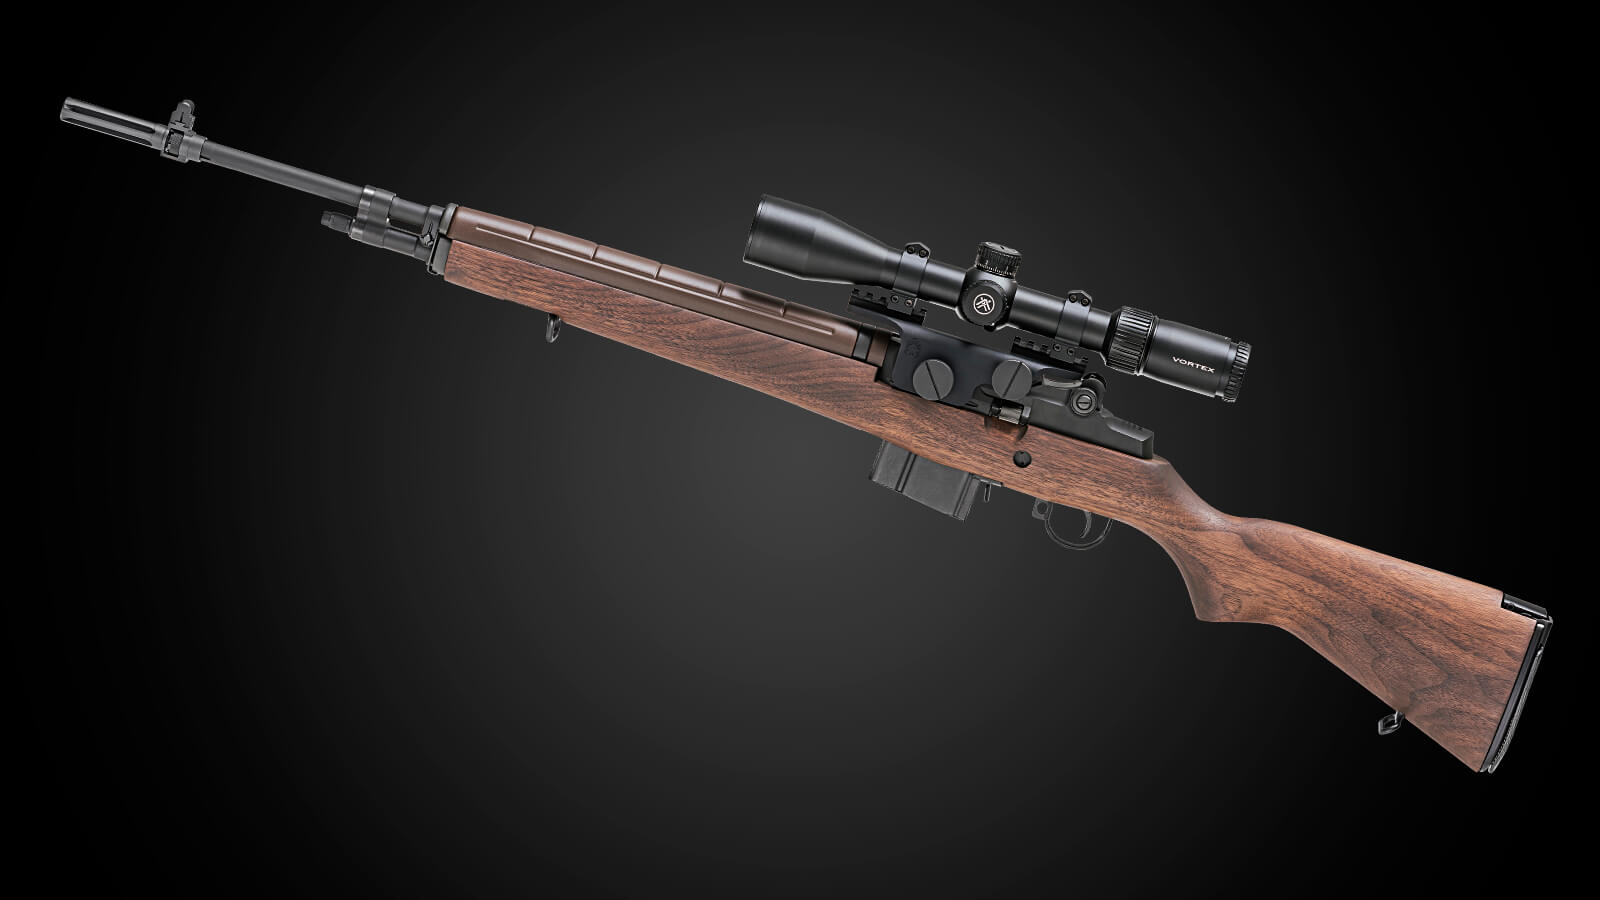 mounting a scope on the Springfield Armory M1A requires a few more steps. 